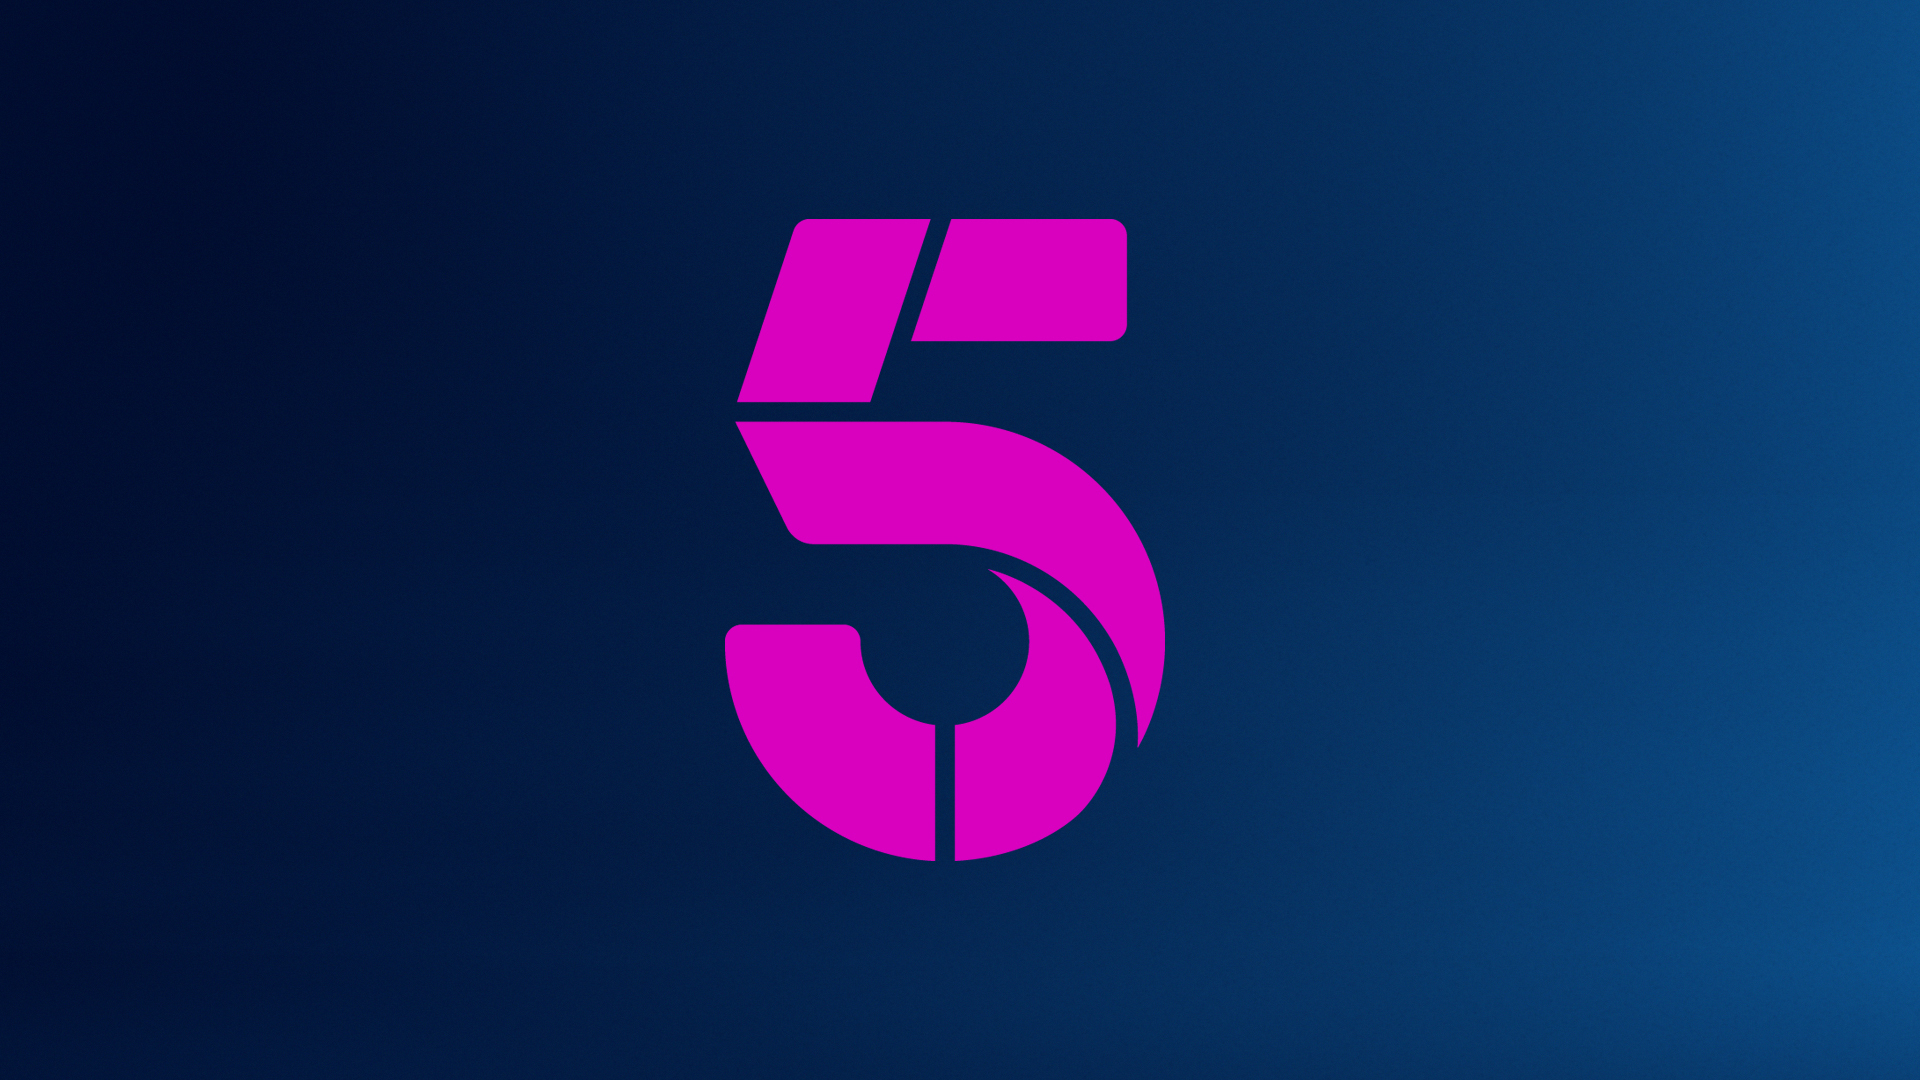 Day 25: Channel 5 respond to claims of voting problems